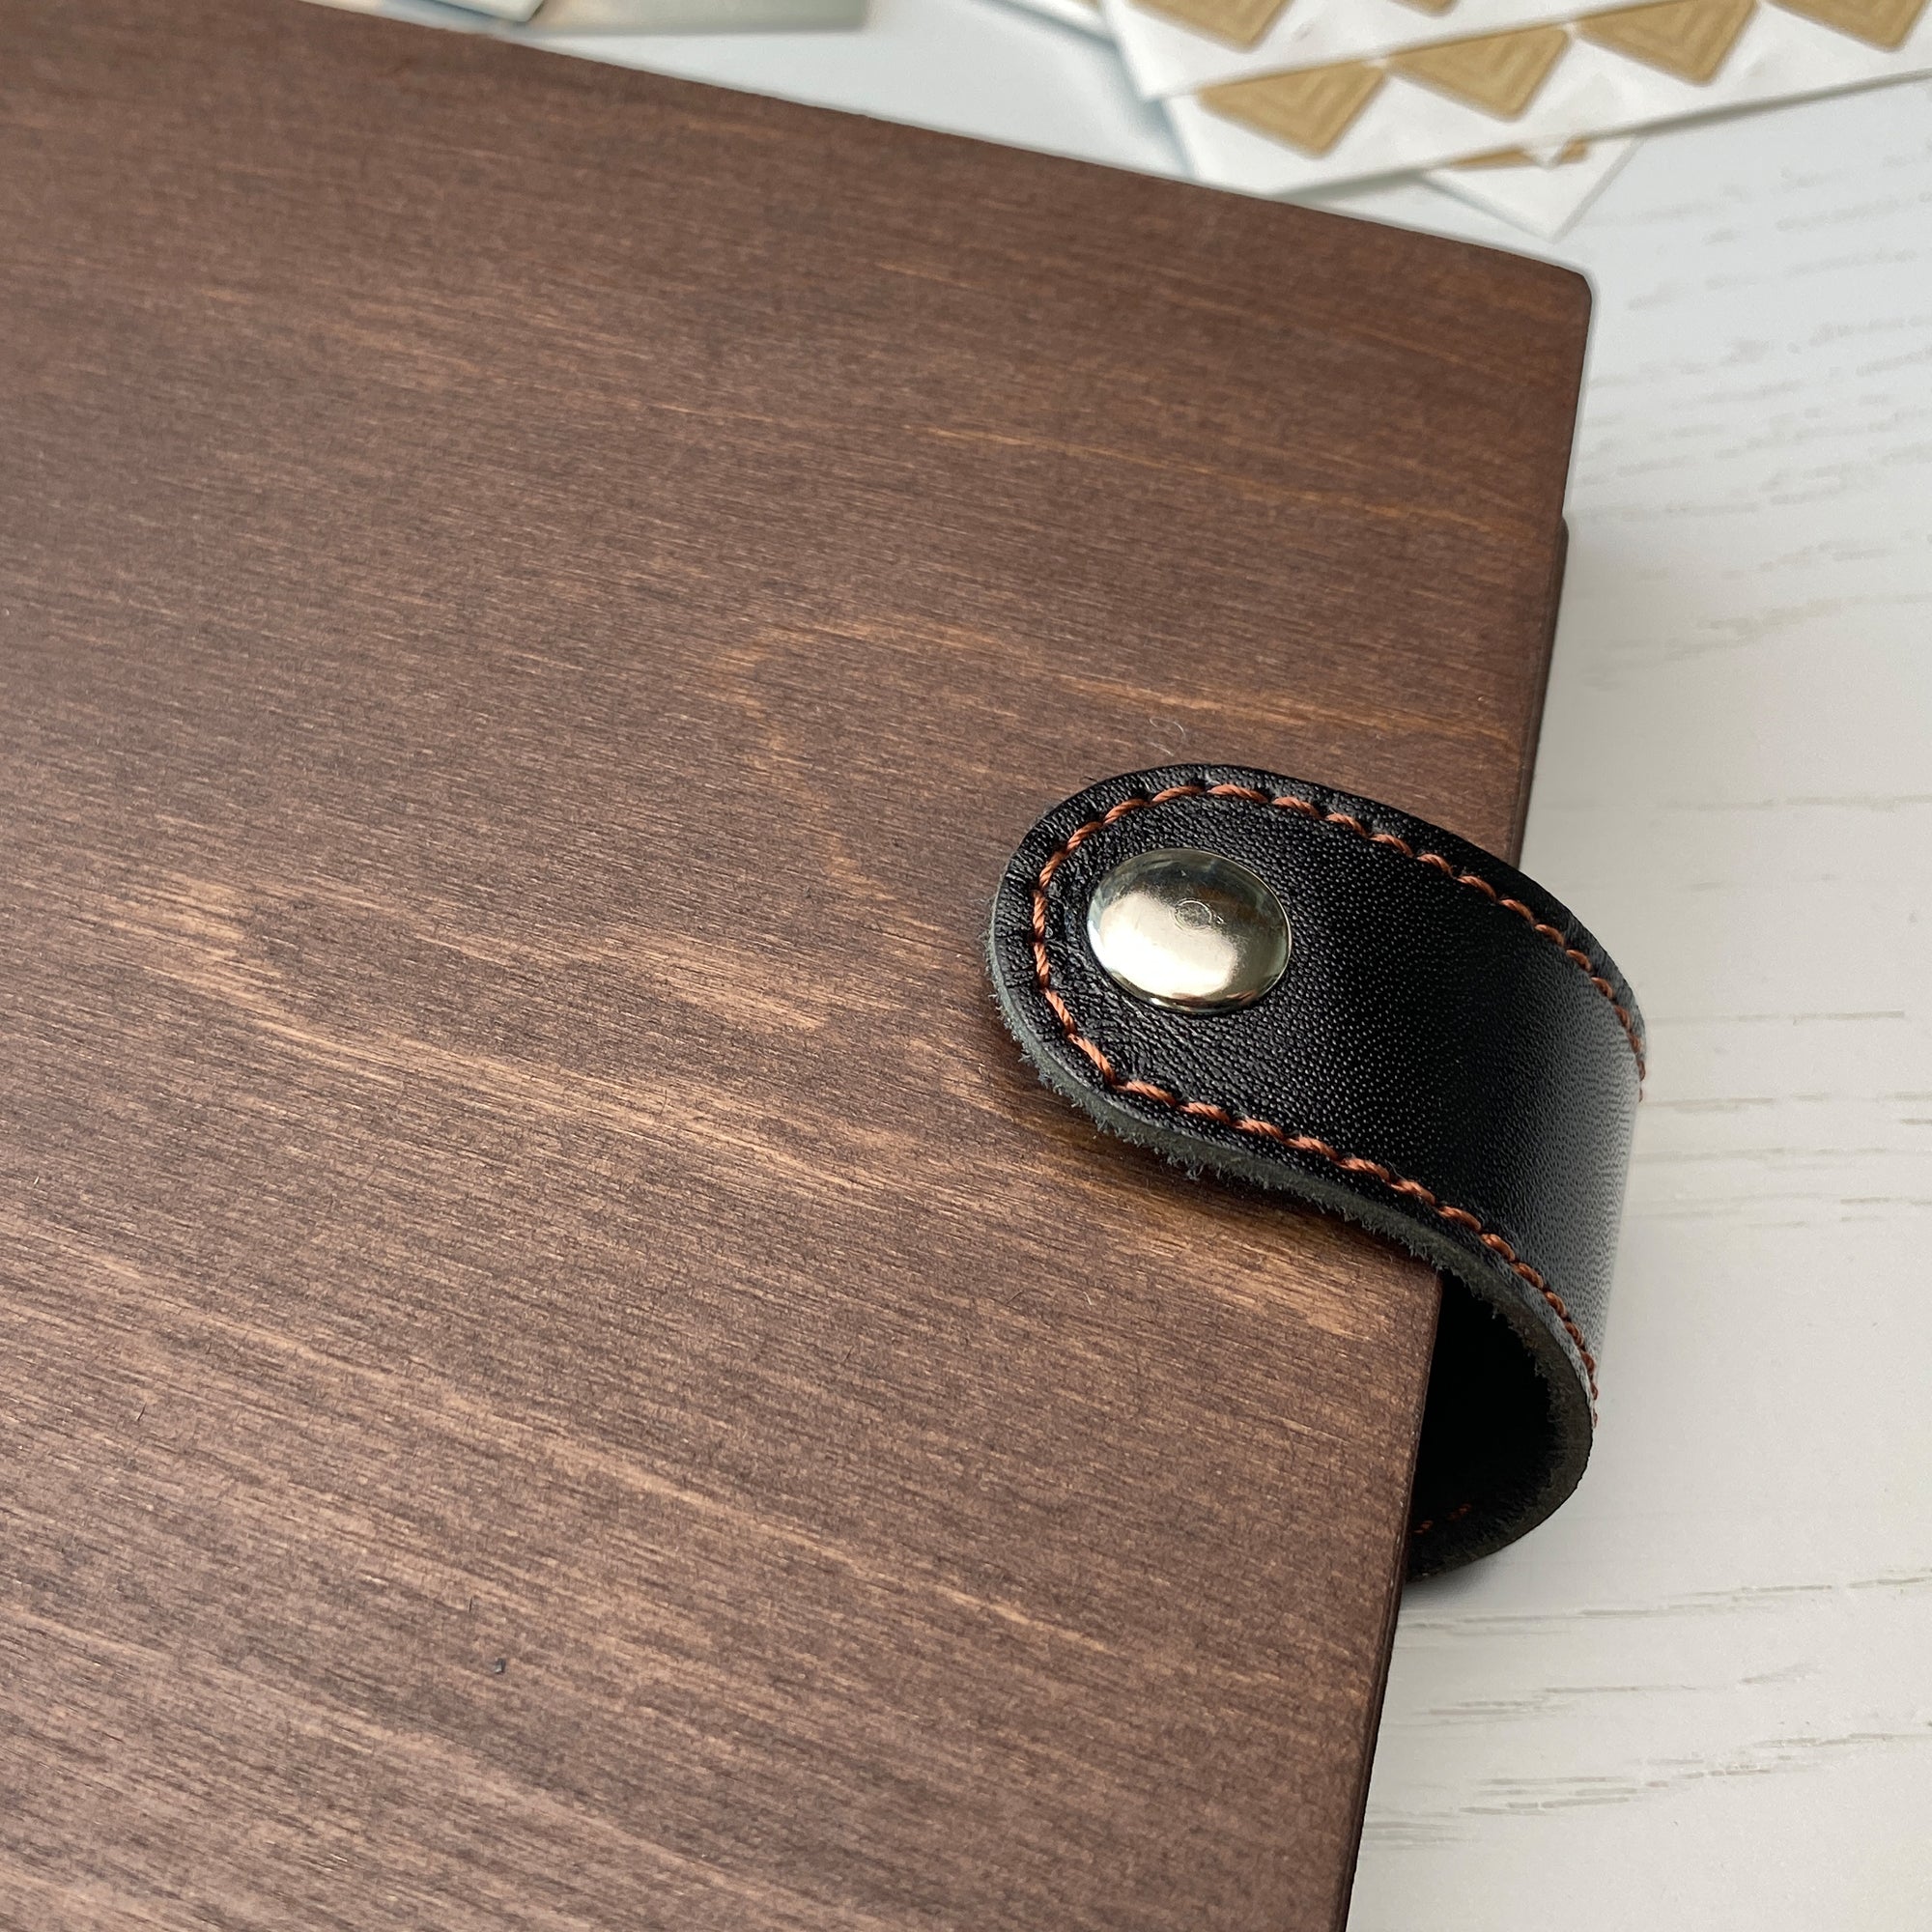 Personalized photo album with leather cover and Prime Meridian engraving